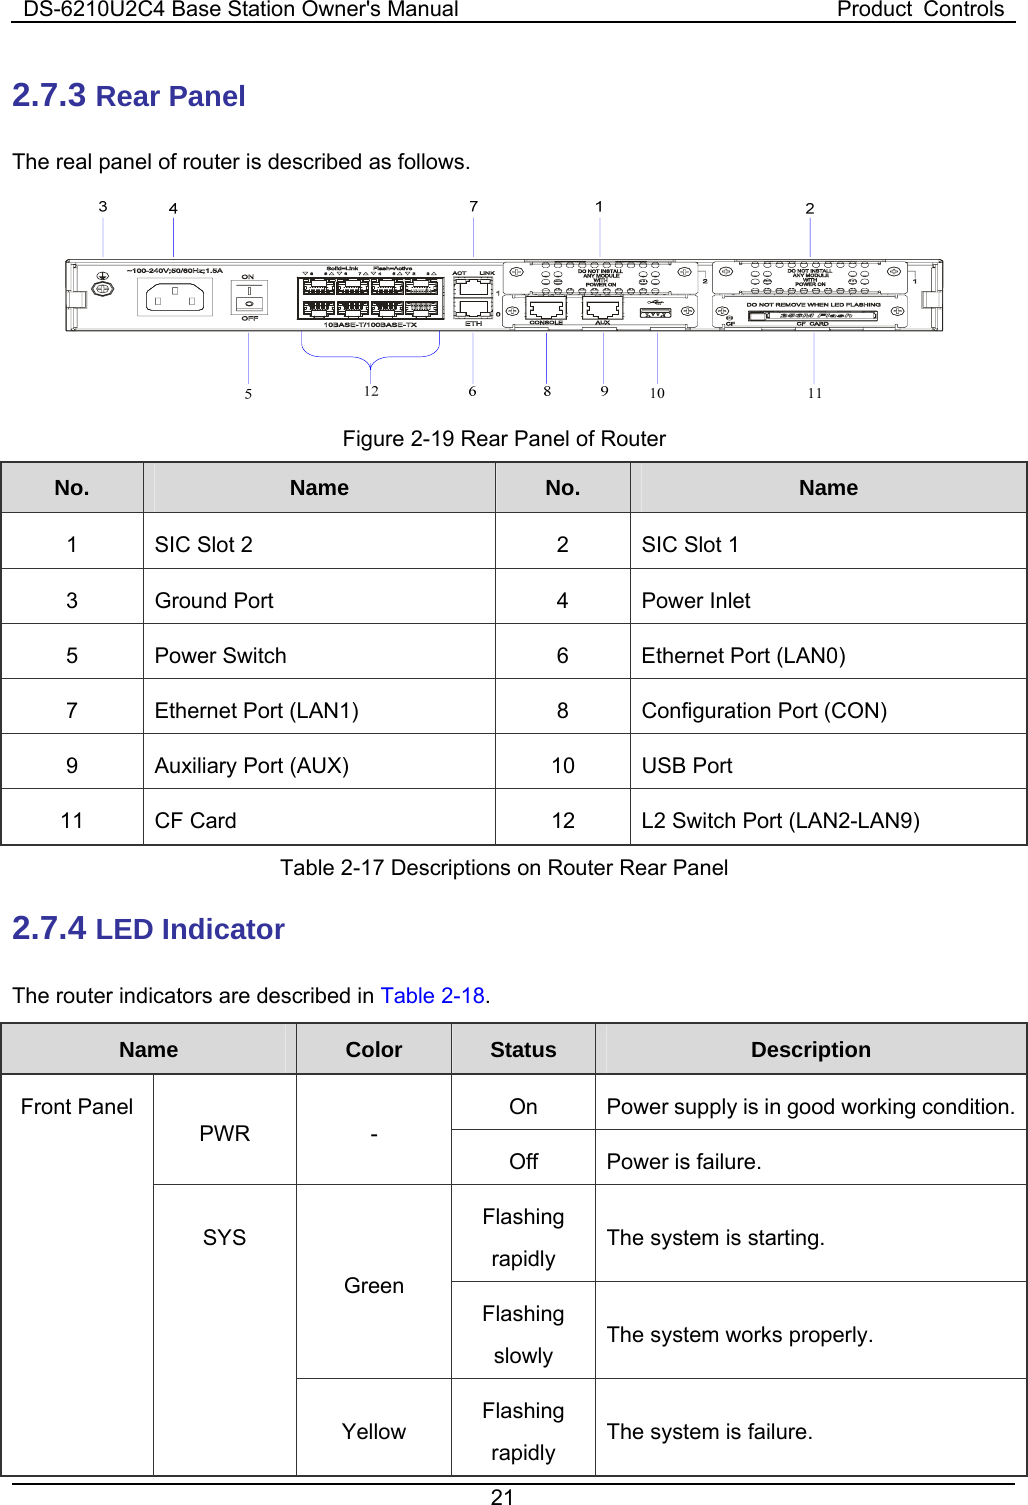 DS-6210U2C4 Base Station Owner&apos;s Manual  Product  Controls 21  2.7.3 Rear Panel   The real panel of router is described as follows.  Figure 2-19 Rear Panel of Router No.  Name   No.  Name  1  SIC Slot 2  2  SIC Slot 1 3  Ground Port    4  Power Inlet   5  Power Switch  6  Ethernet Port (LAN0) 7  Ethernet Port (LAN1)  8  Configuration Port (CON) 9  Auxiliary Port (AUX)  10  USB Port   11  CF Card  12  L2 Switch Port (LAN2-LAN9) Table 2-17 Descriptions on Router Rear Panel 2.7.4 LED Indicator   The router indicators are described in Table 2-18. Name   Color  Status  Description On    Power supply is in good working condition. PWR - Off  Power is failure.   Flashing rapidly The system is starting.   Green Flashing slowly The system works properly.   Front Panel   SYS Yellow Flashing rapidly The system is failure.   